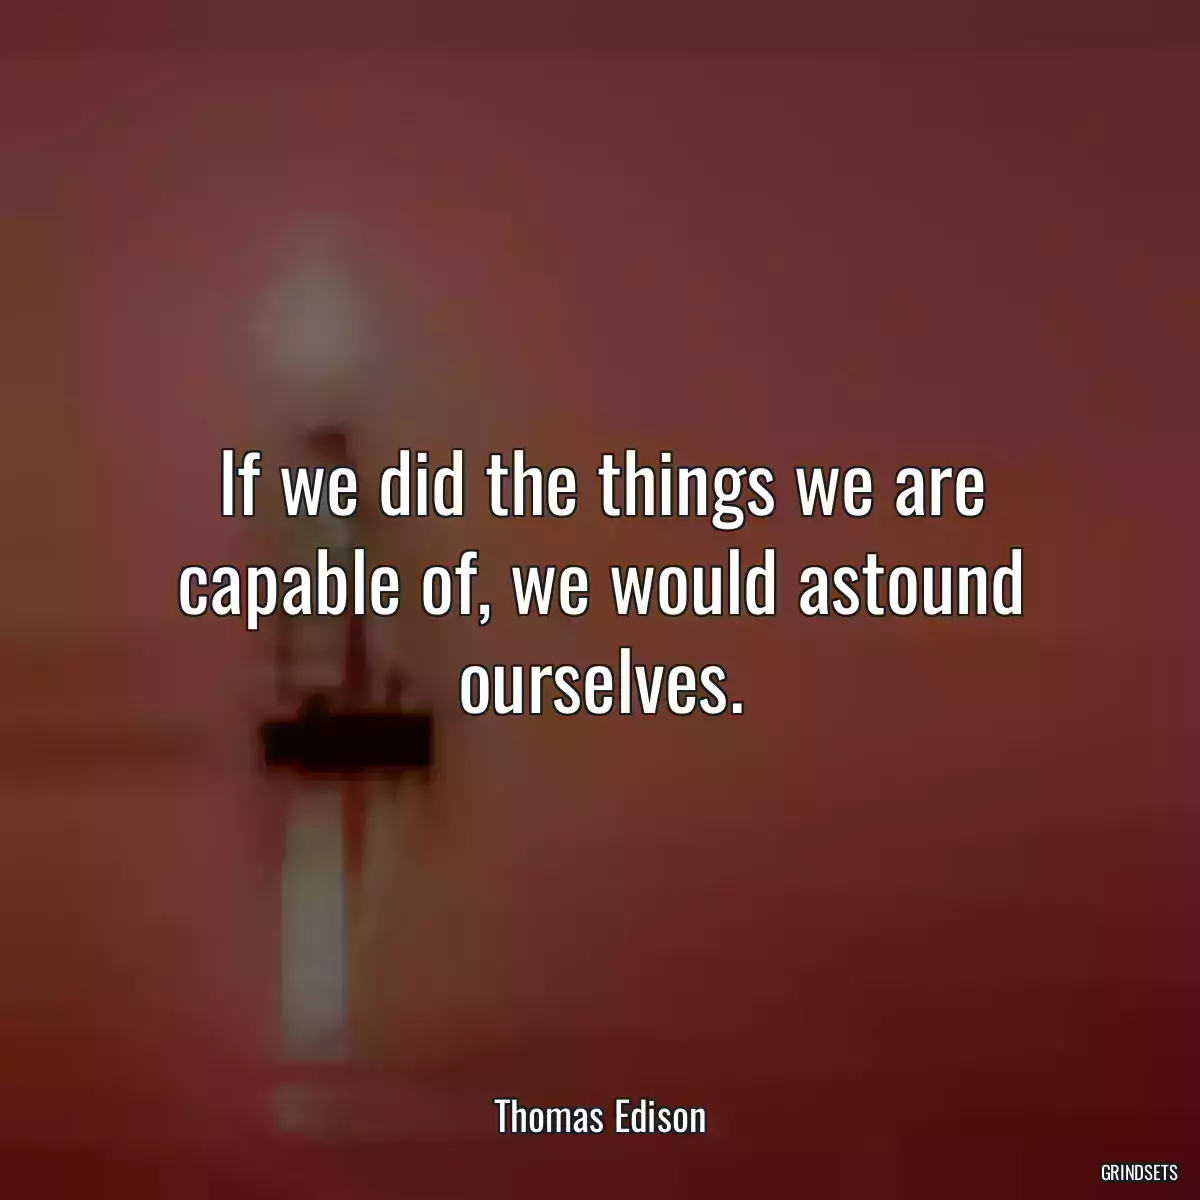 If we did the things we are capable of, we would astound ourselves.